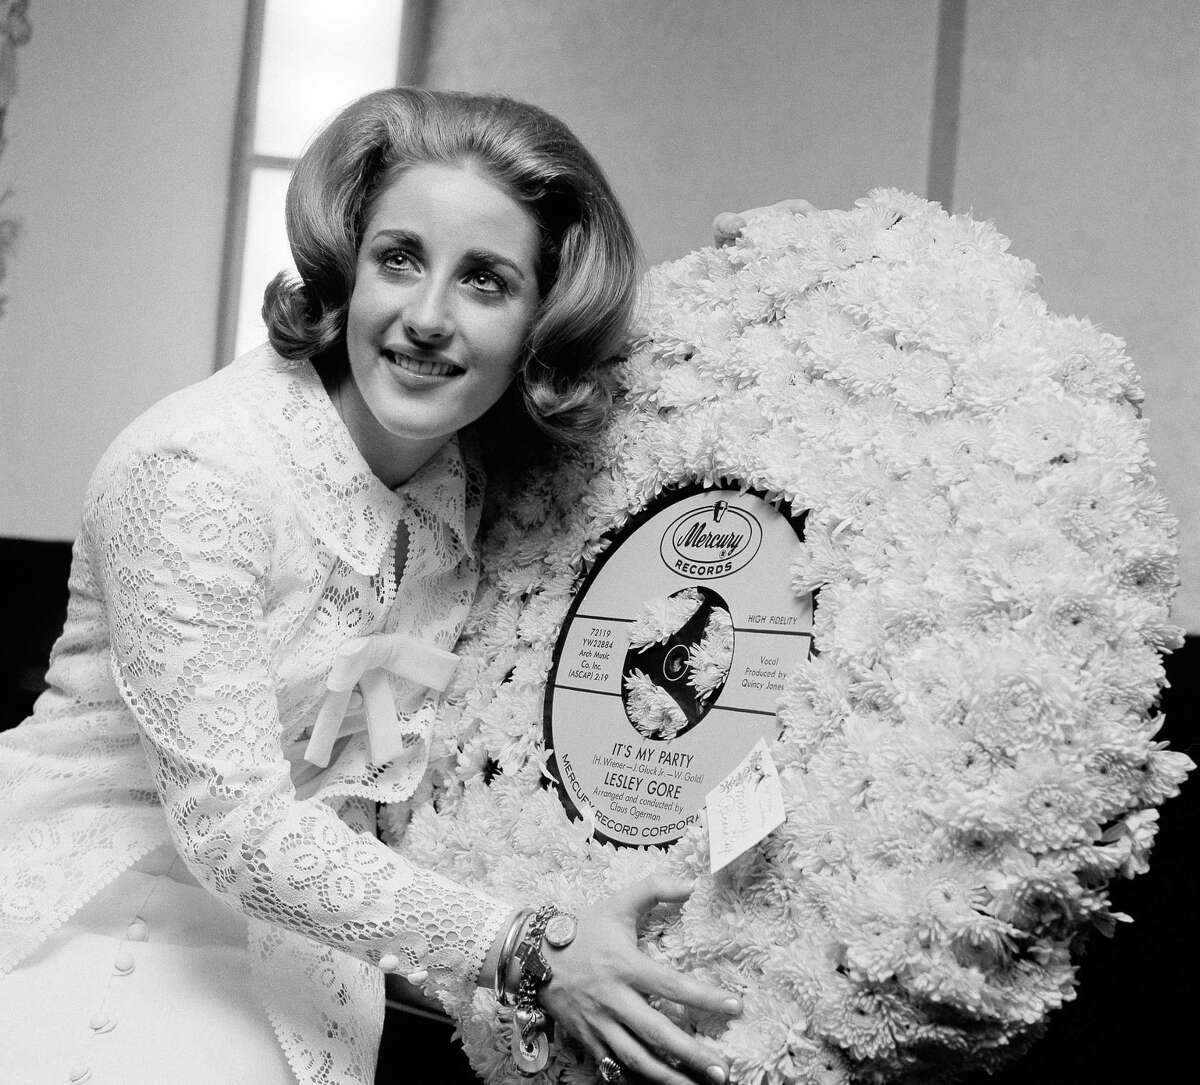 In this May 5, 1964 file photo, singer Lesley Gore hugs a flowered record at her 18th birthday party celebrated at the Delmonico Hotel in New York.